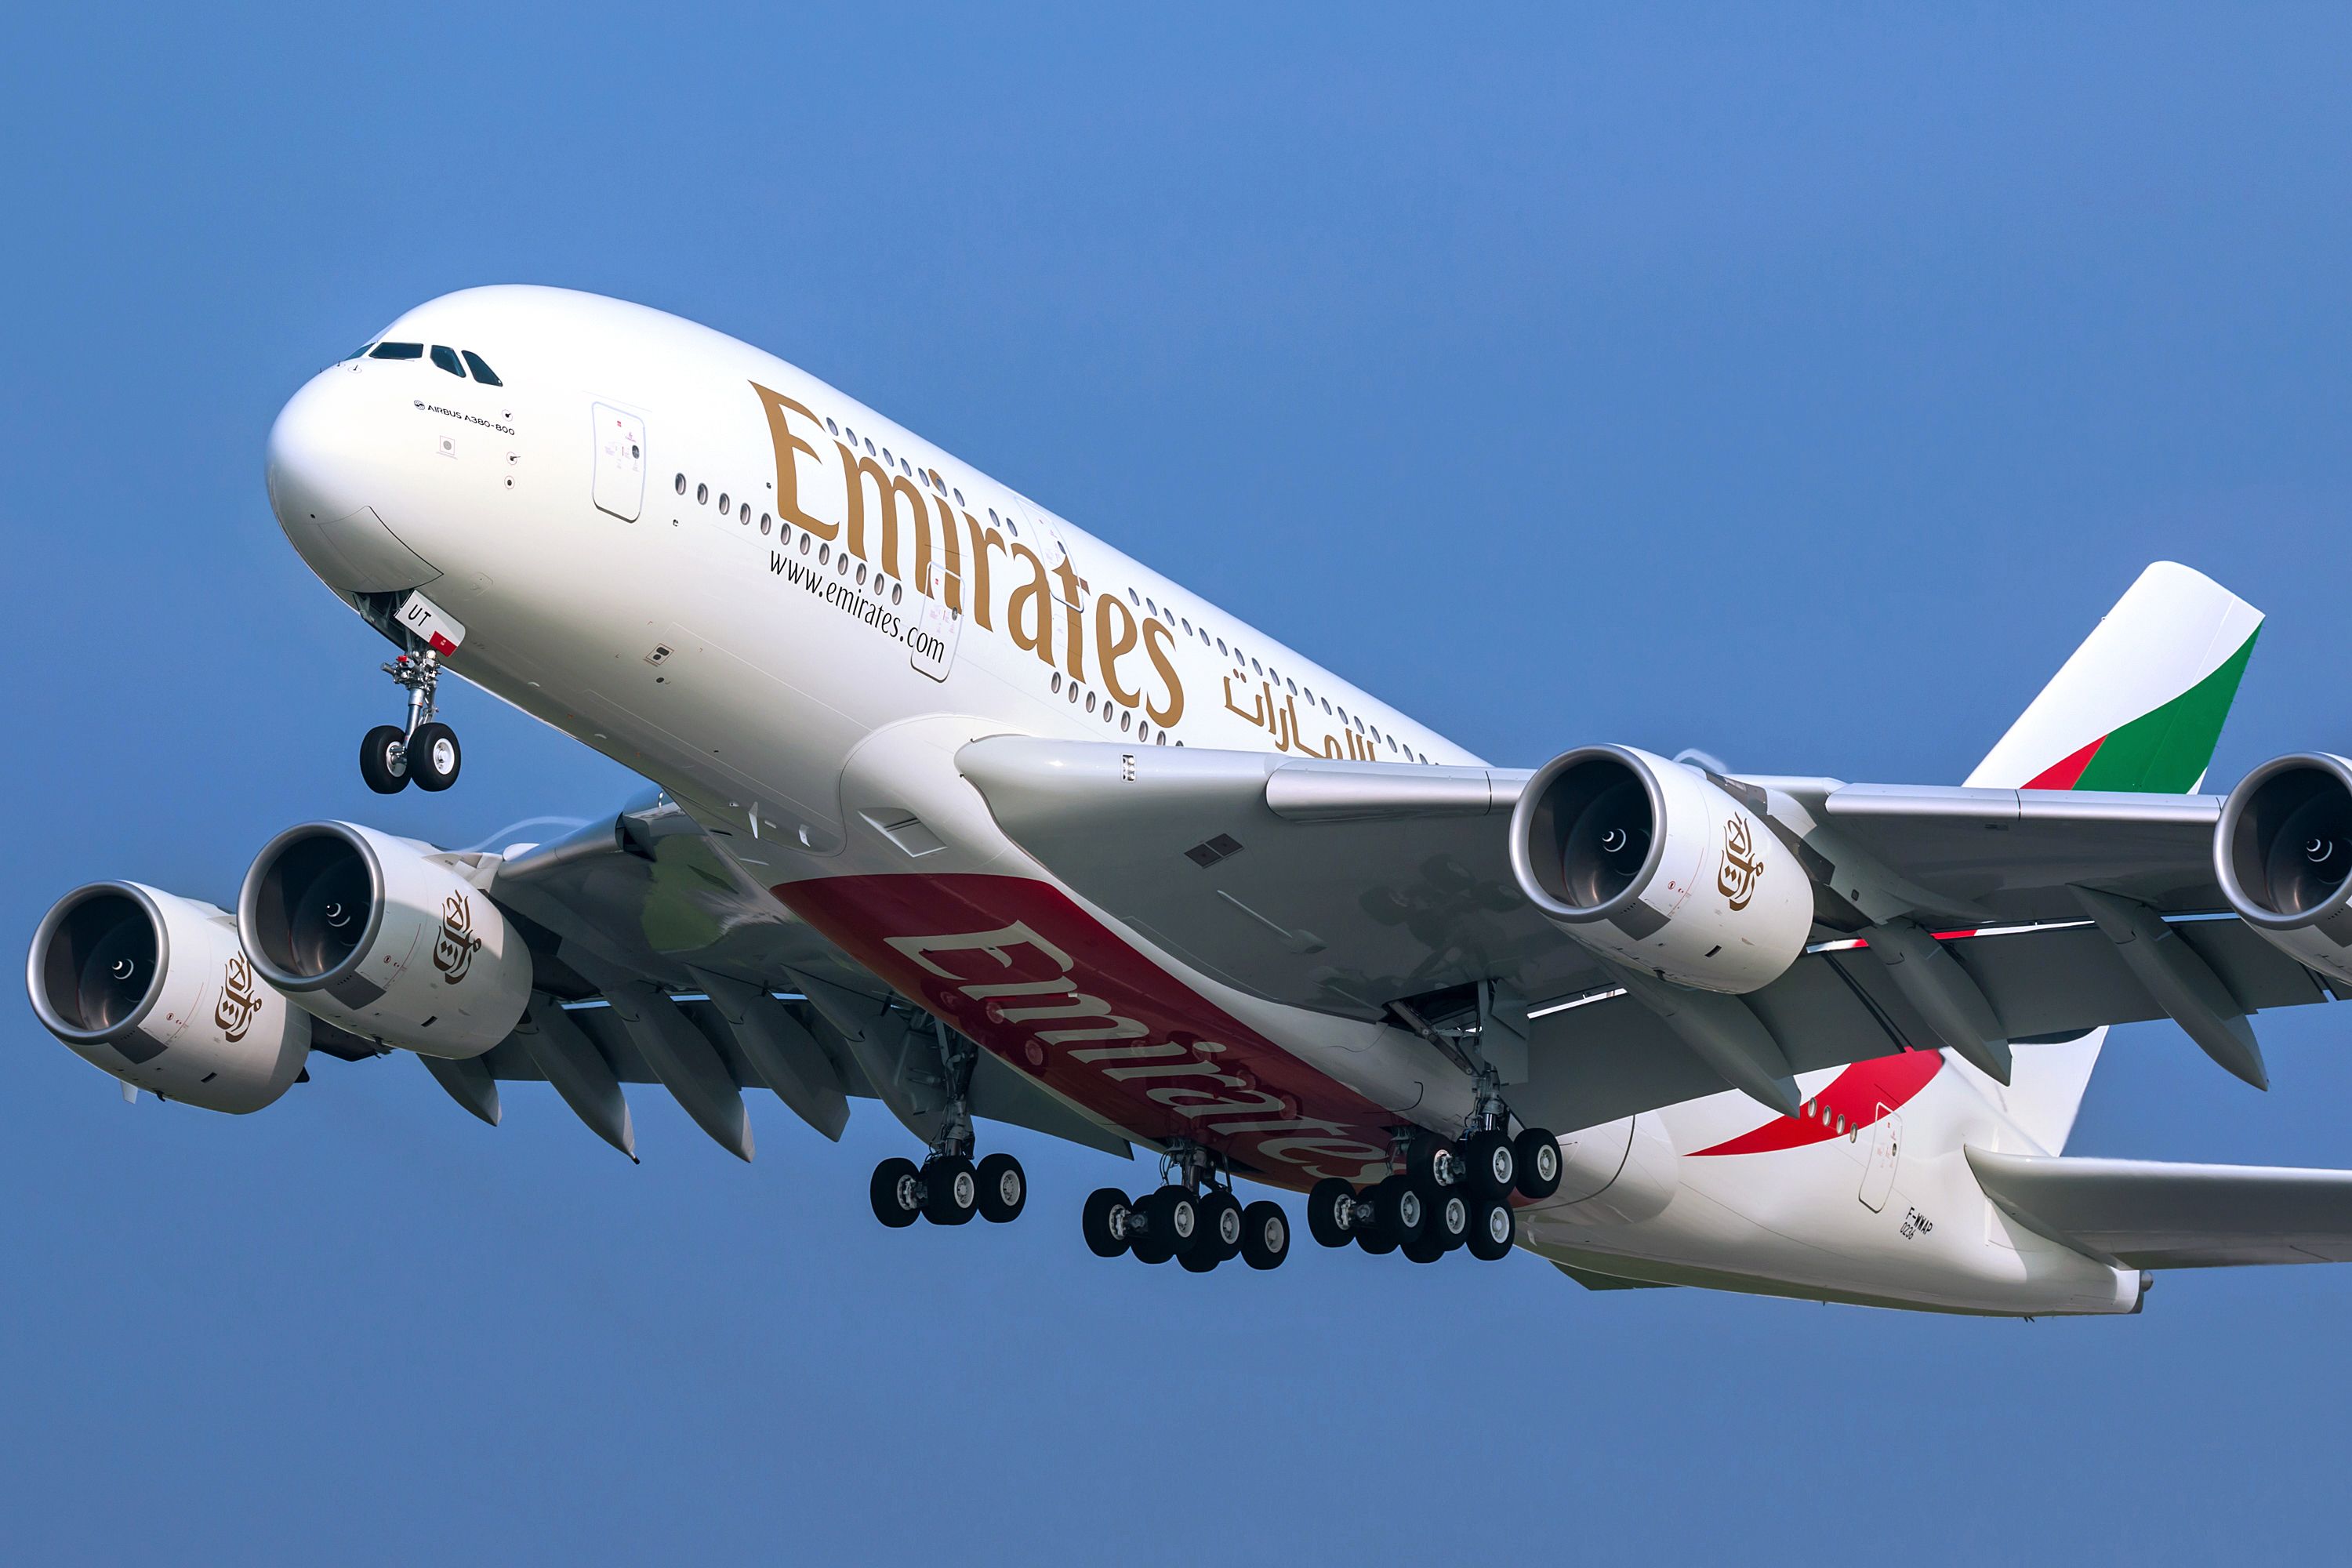 Emirates Airbus A380 after take off